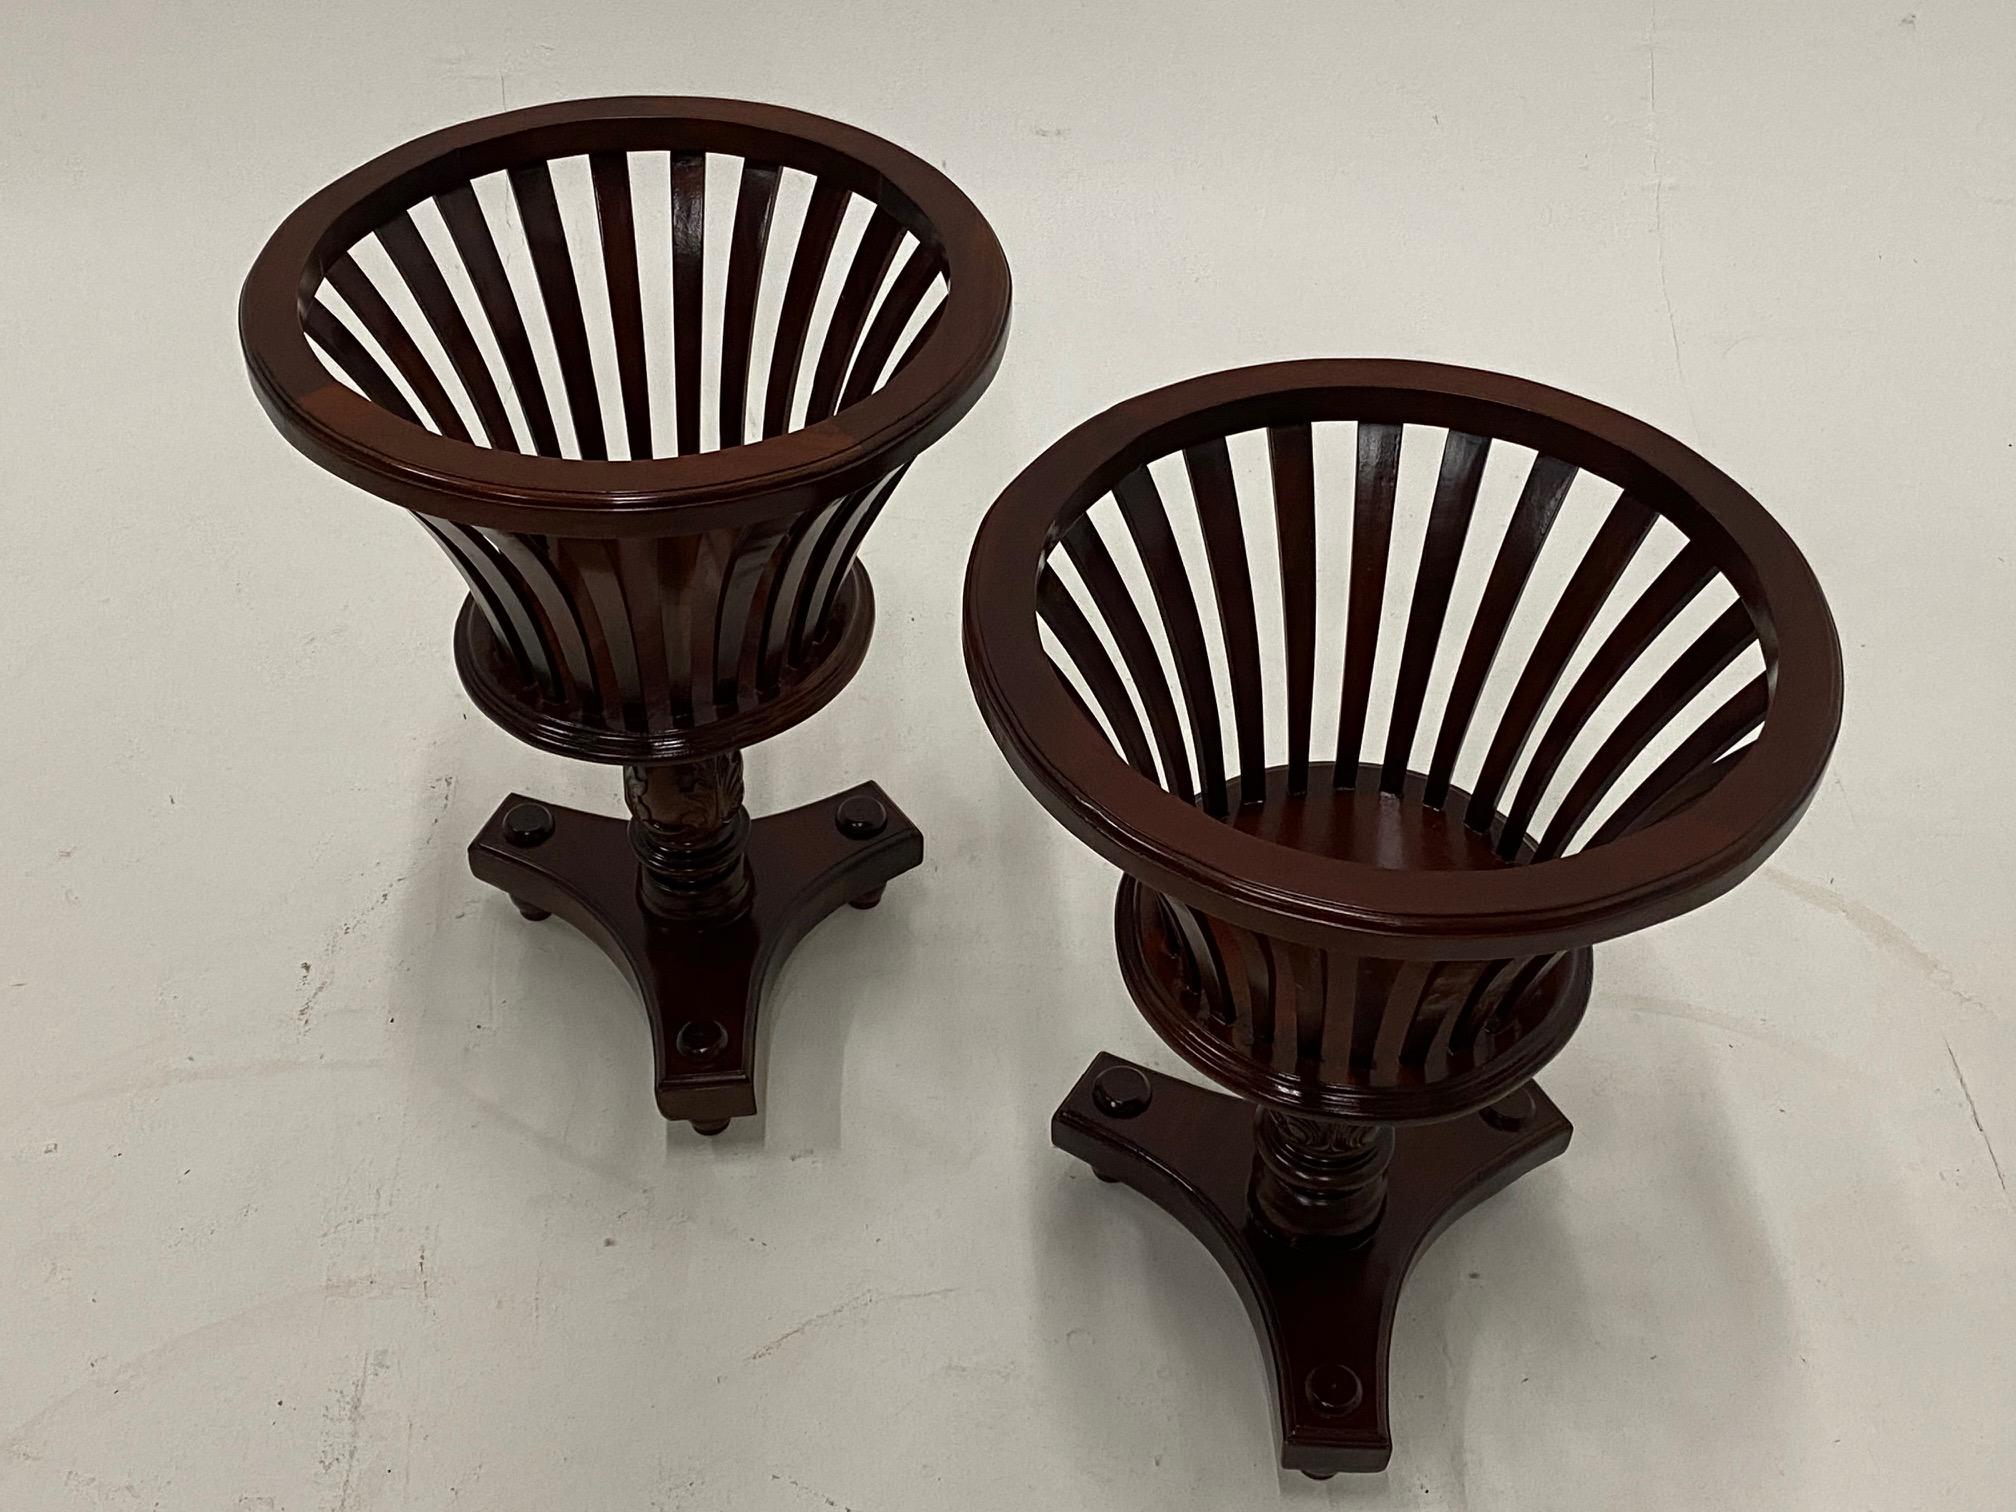 Rich mahogany pair of pierced plant stands having lovely carved wood columns and tripod bases.
Base is 14.5 square.